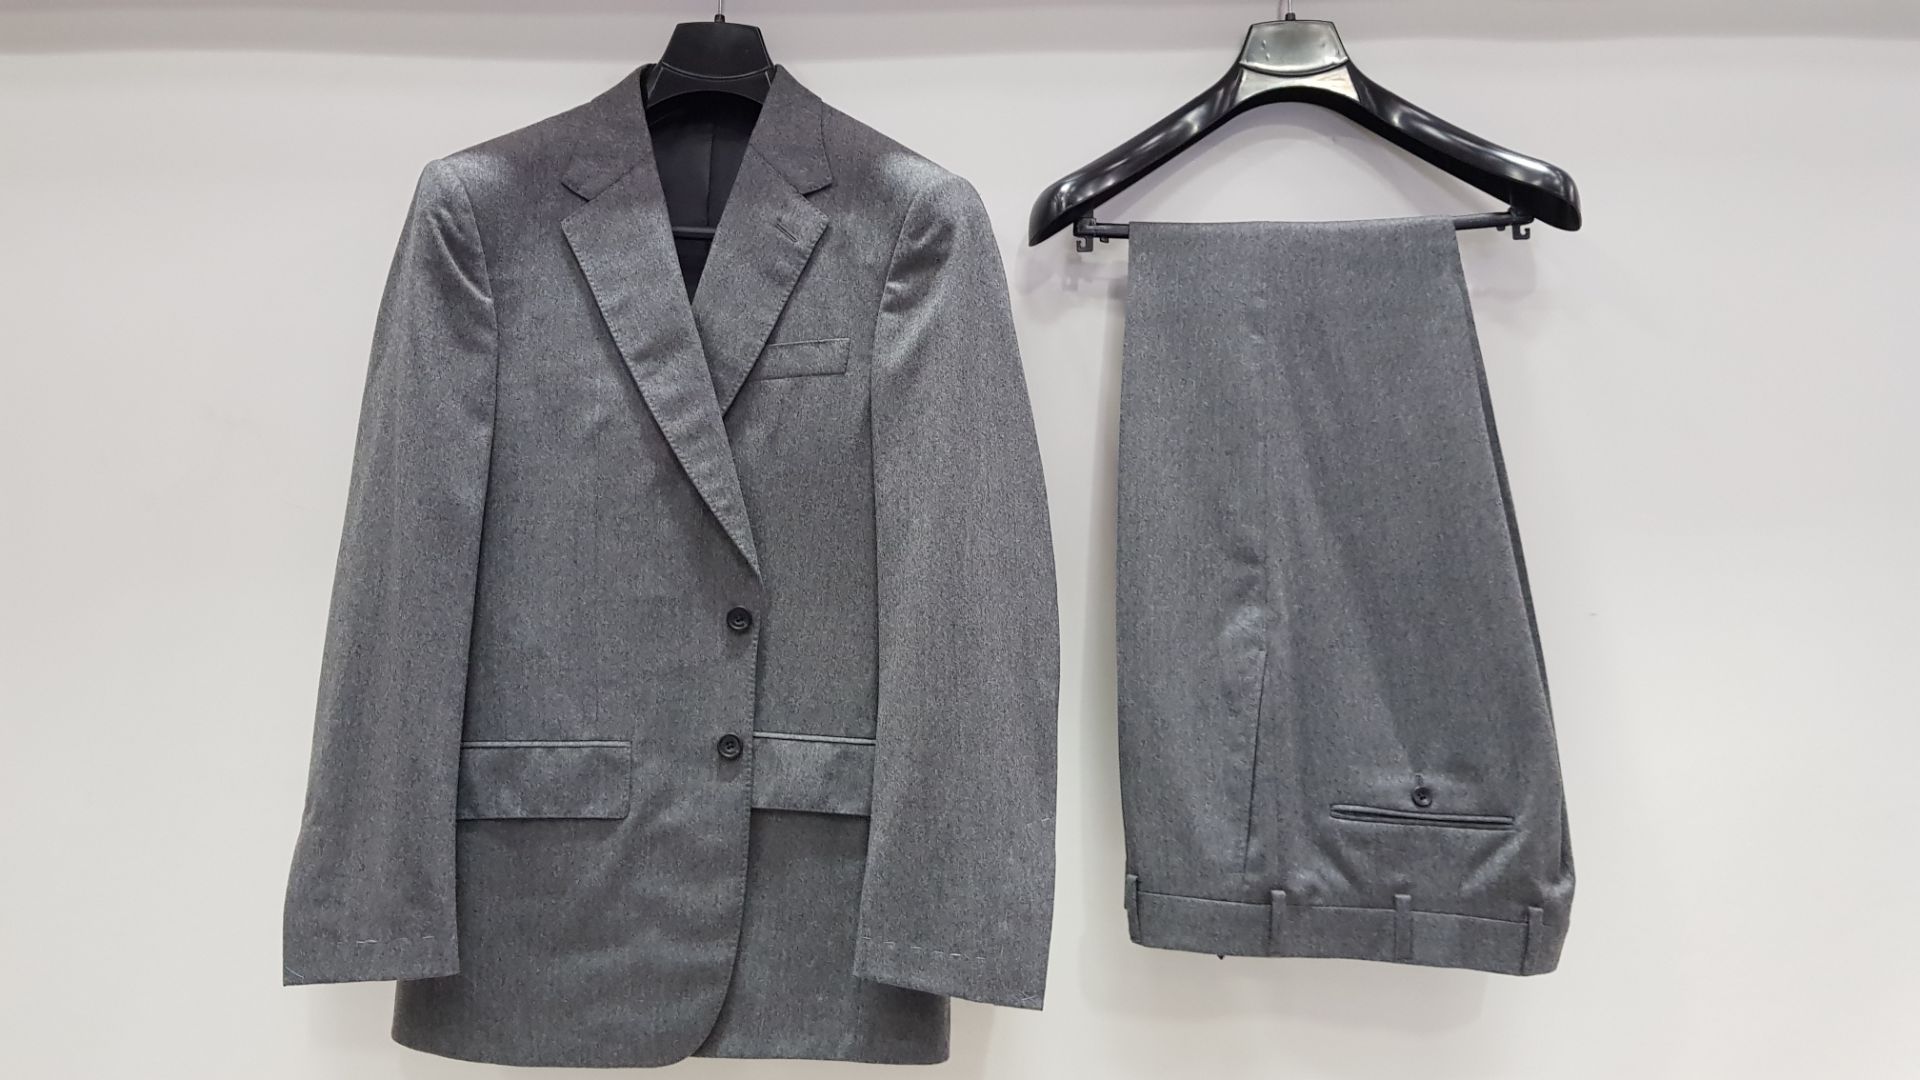 3 X BRAND NEW LUTWYCHE HAND TAILORED GREY SUITS (SIZES 40R,44R) (PLEASE NOTE SUITS ARE NOT FULLY